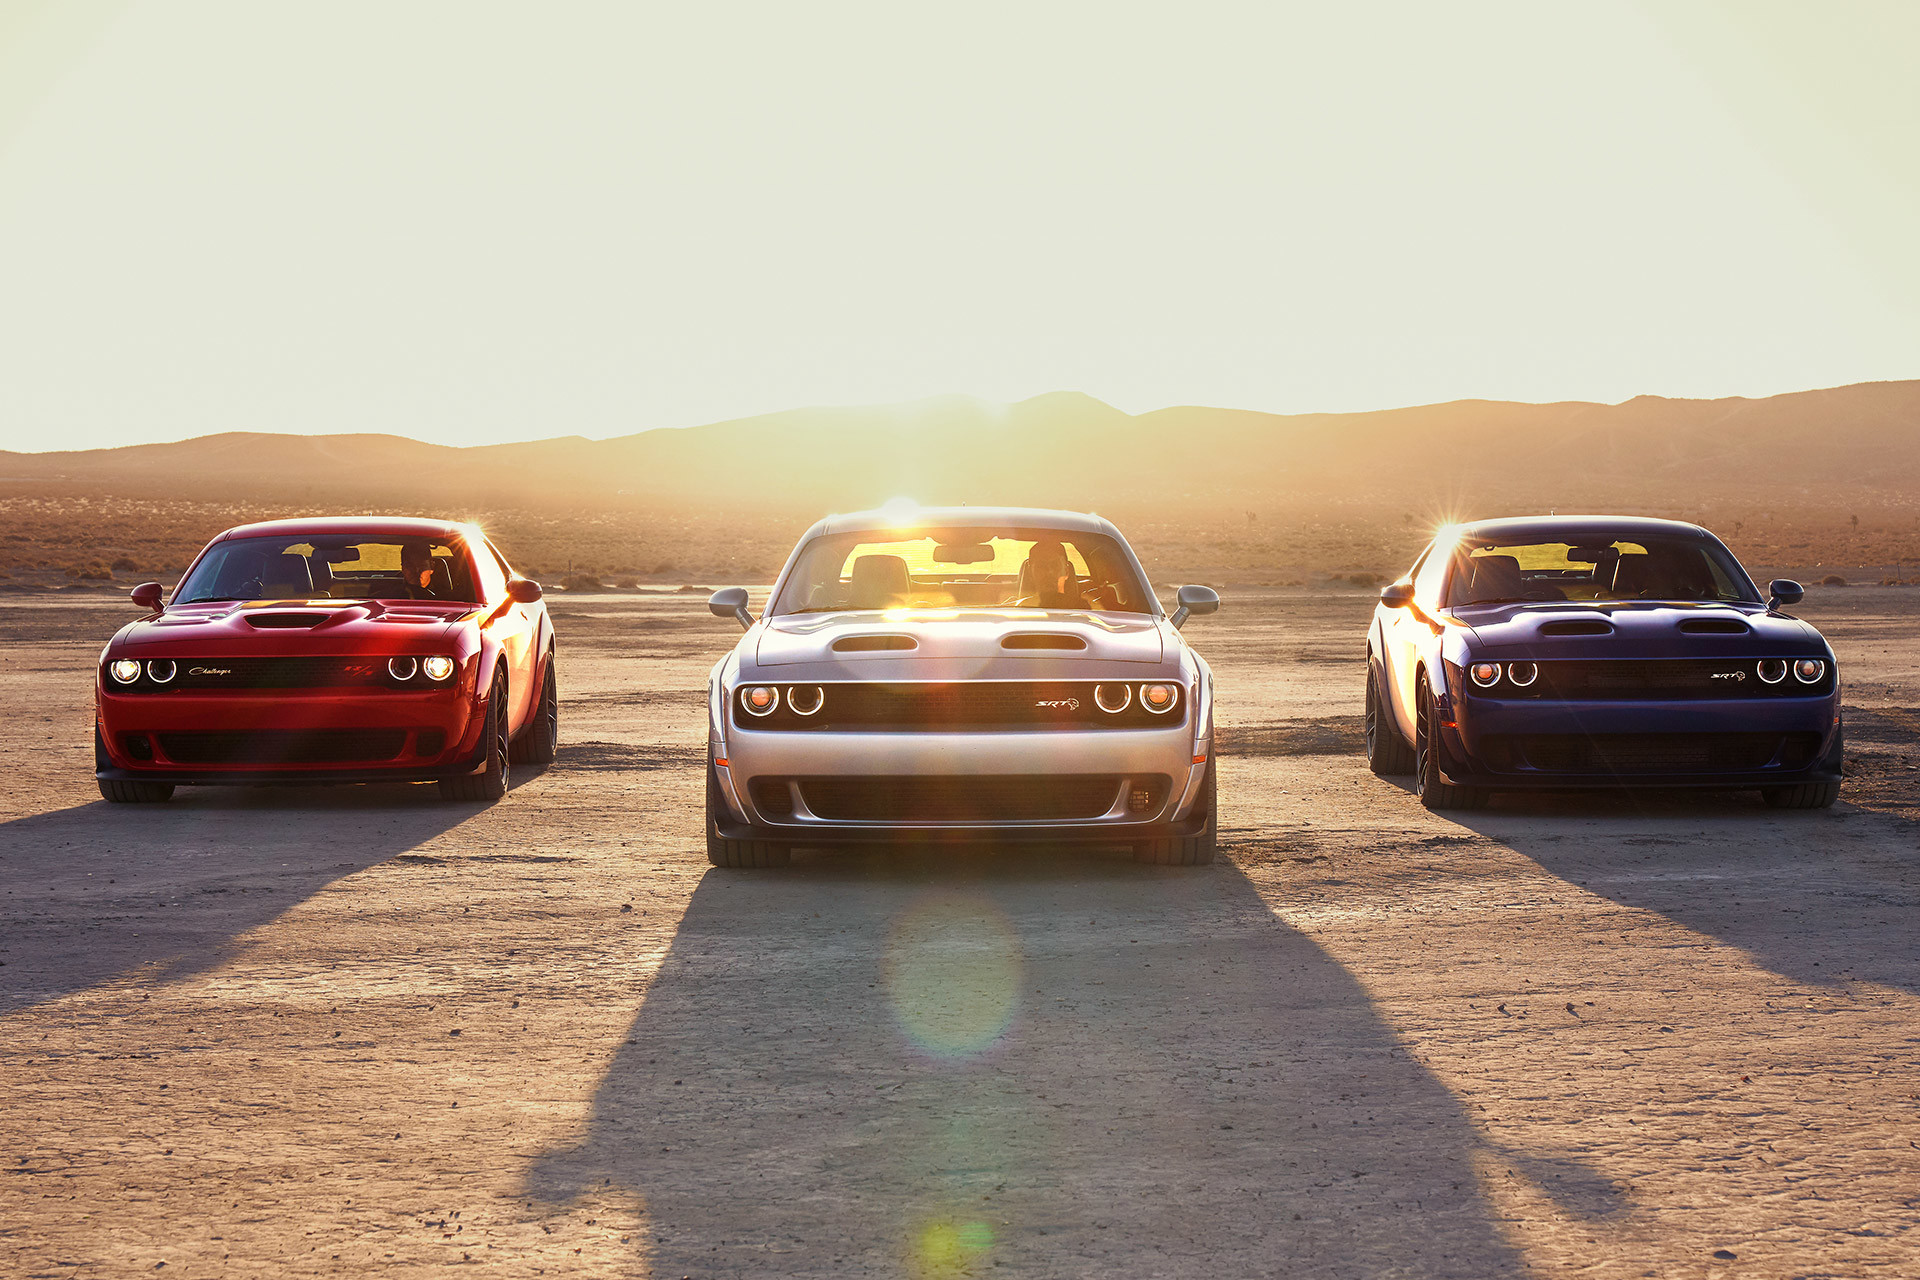 Red, silver, and black 2022 Dodge Challengers, all parked on a desert field with mountains in the background.